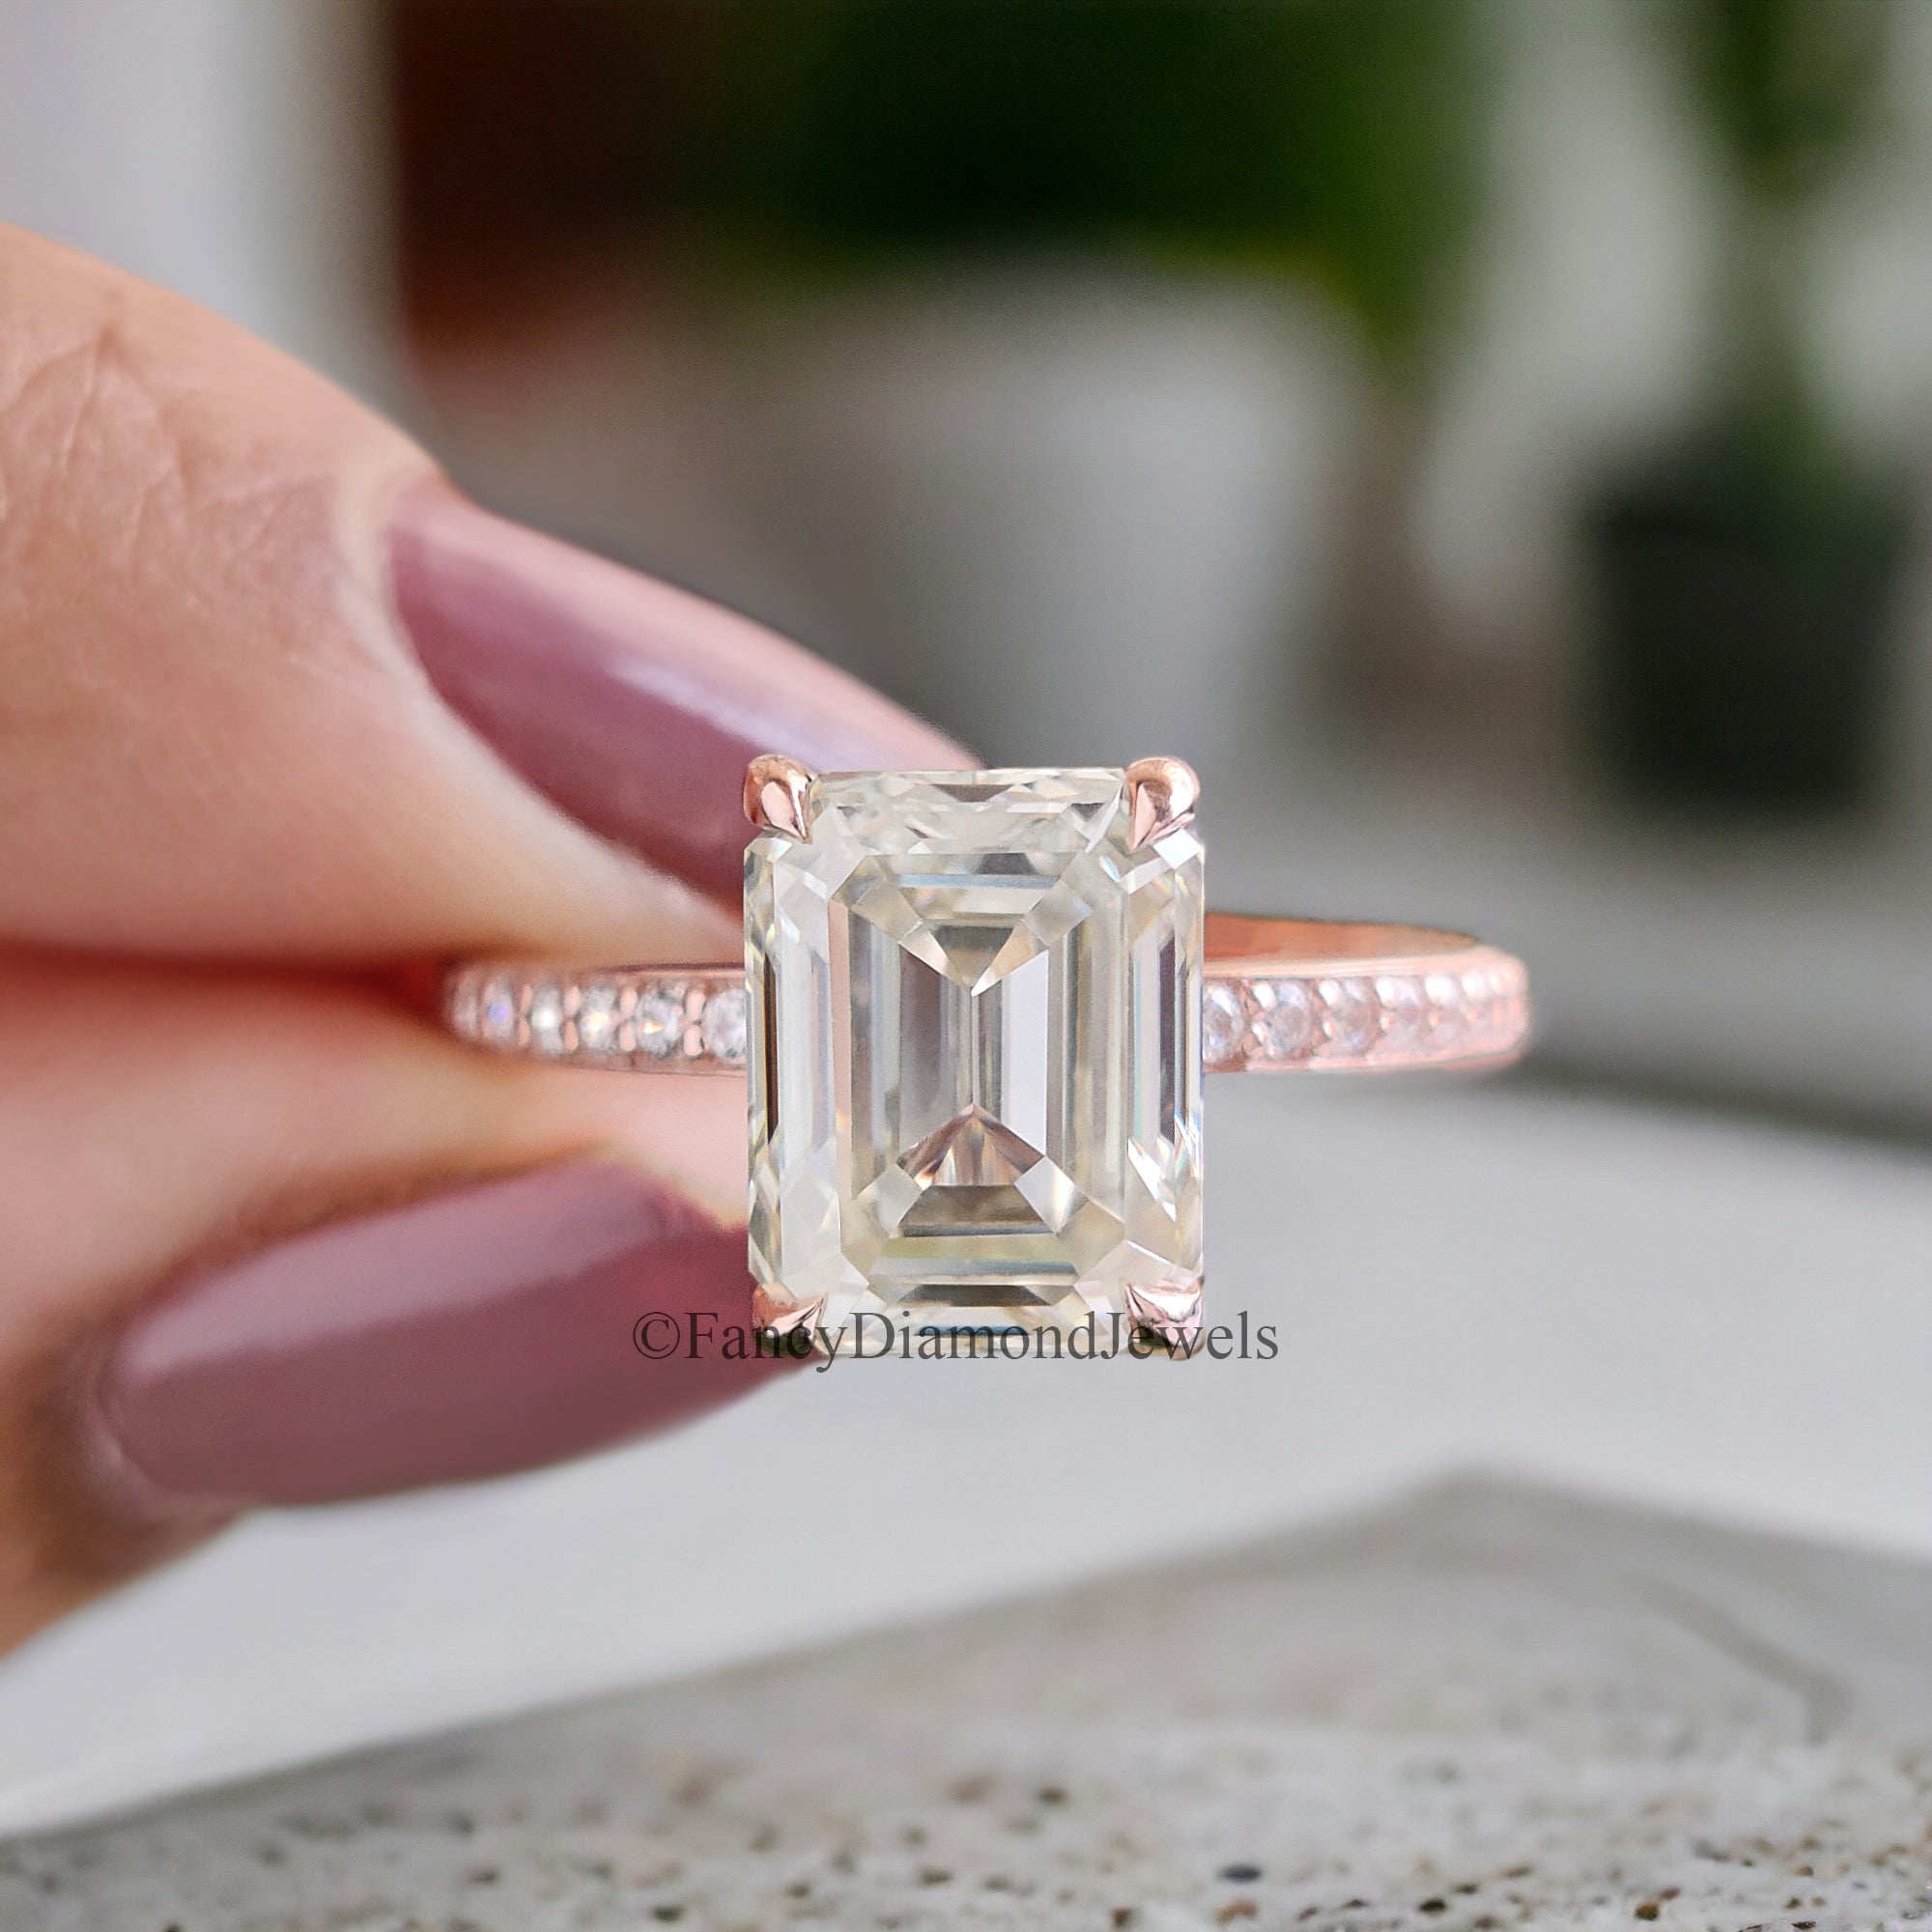 Handmade Custom Ring Emerald Cut Colorless Moissanite Engagement Ring 4 Prongs Wedding Promise Ring 14K Solid Gold Ring Stacking Rings FD72